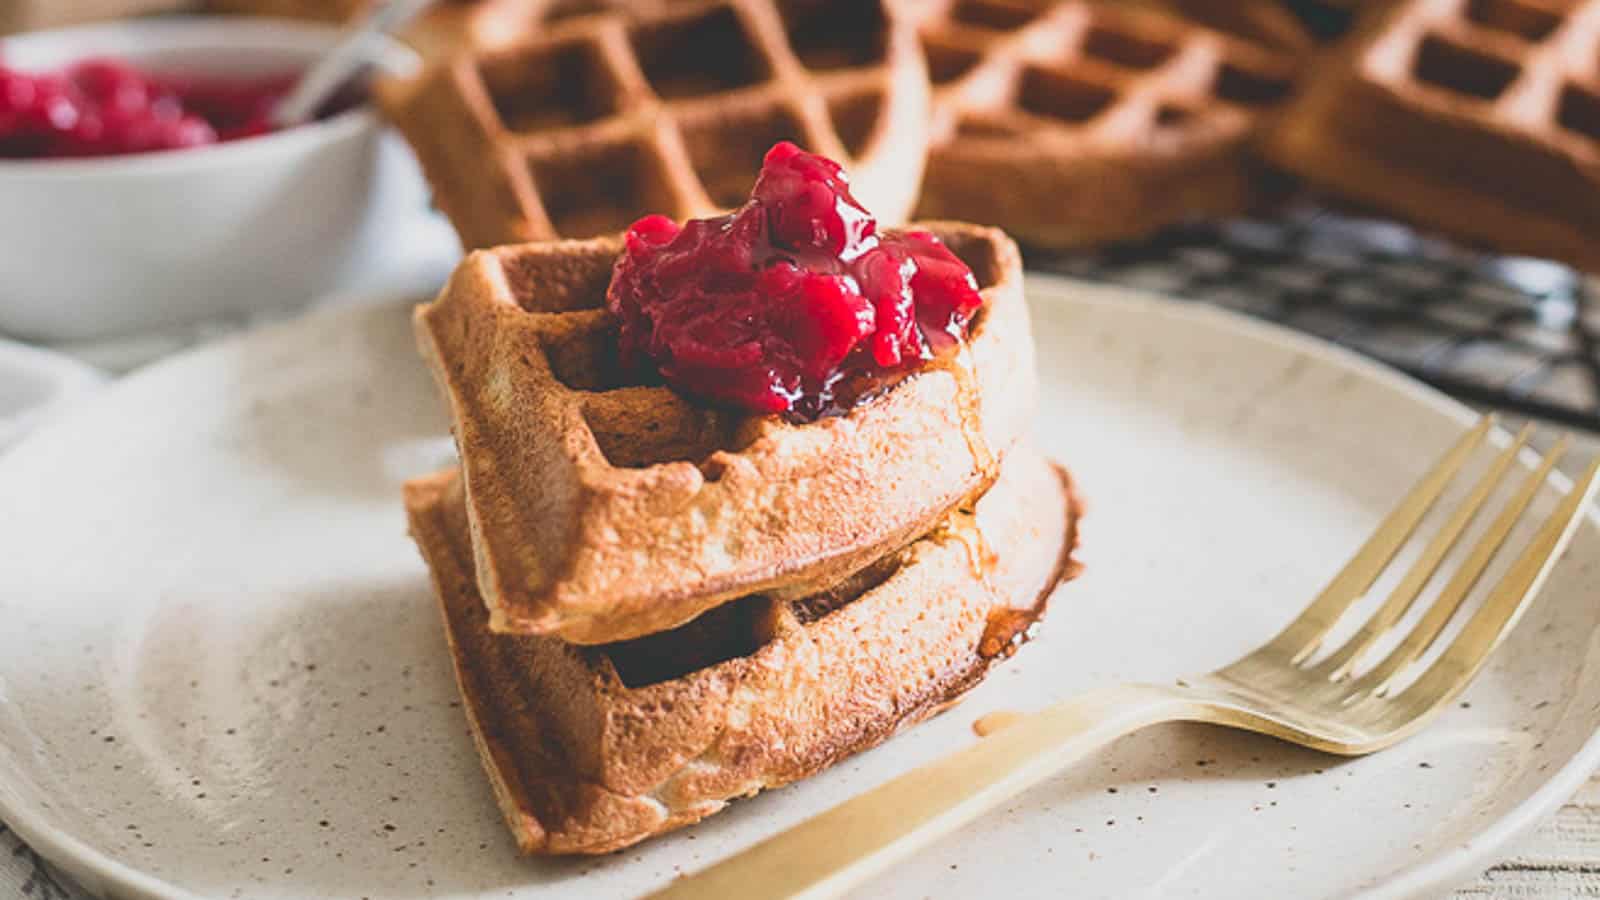 Waffles with cranberry sauce on a plate.